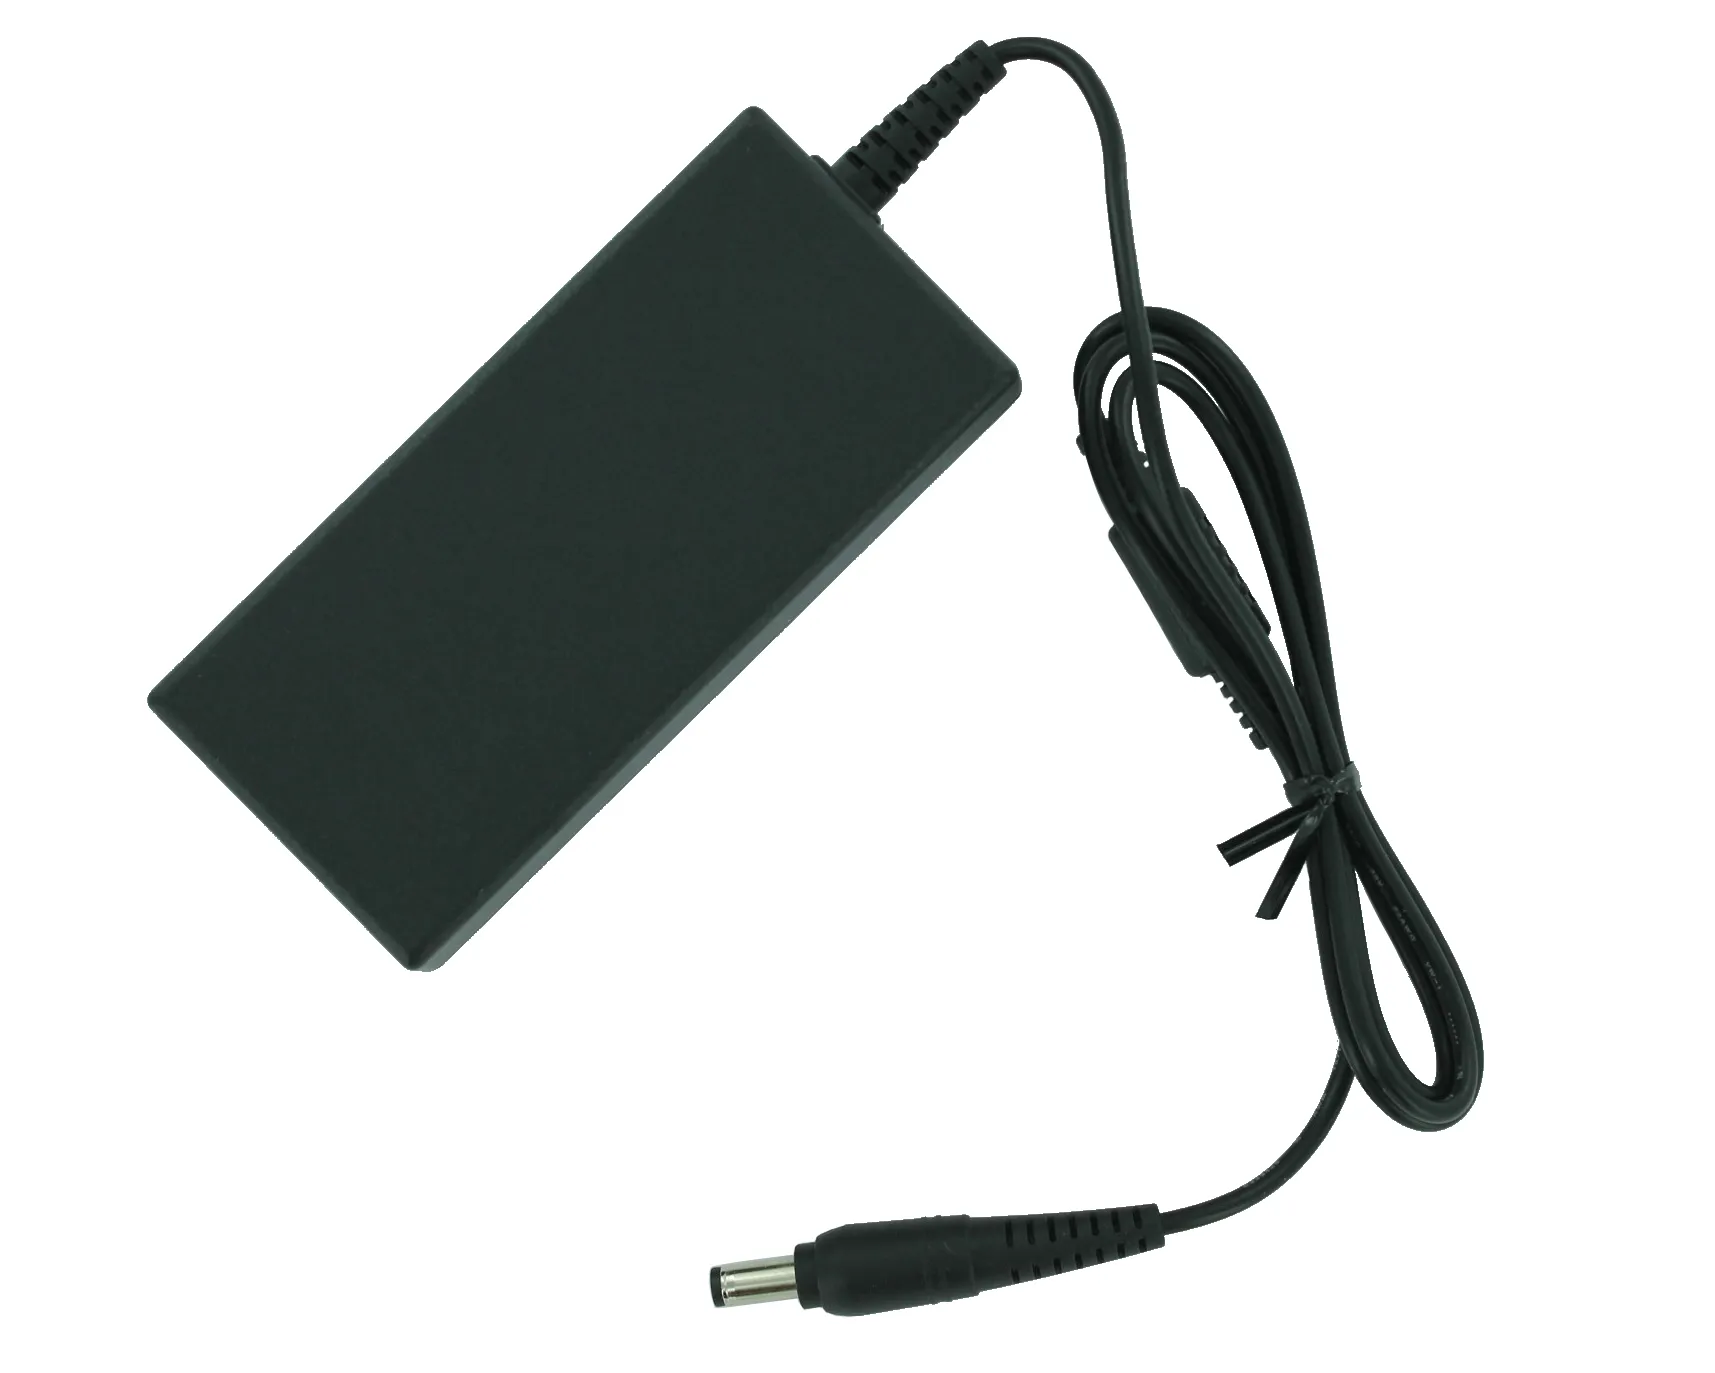 HP VH240A 23.8-INCH MONITOR - 1KL30AA Charger (AC Adapter) 911754-001